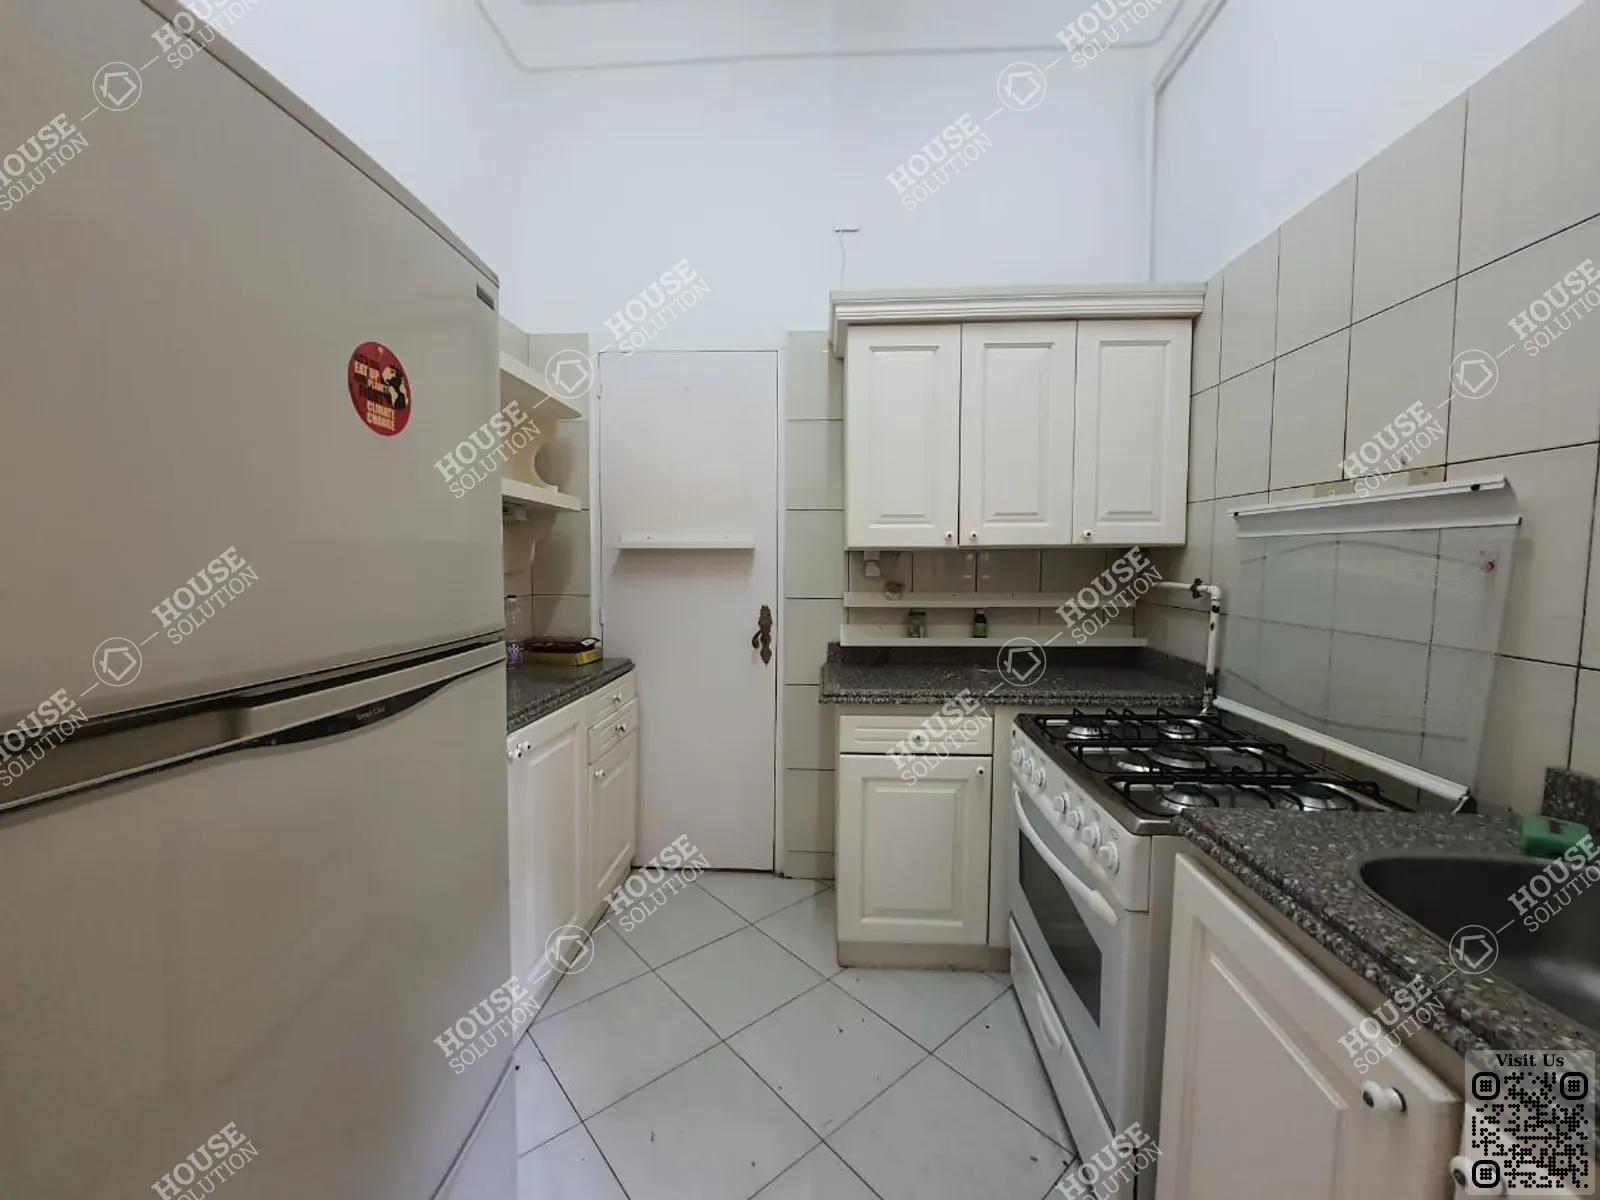 KITCHEN  @ Apartments For Rent In Maadi Maadi Sarayat Area: 202 m² consists of 3 Bedrooms 2 Bathrooms Furnished 5 stars #5362-2